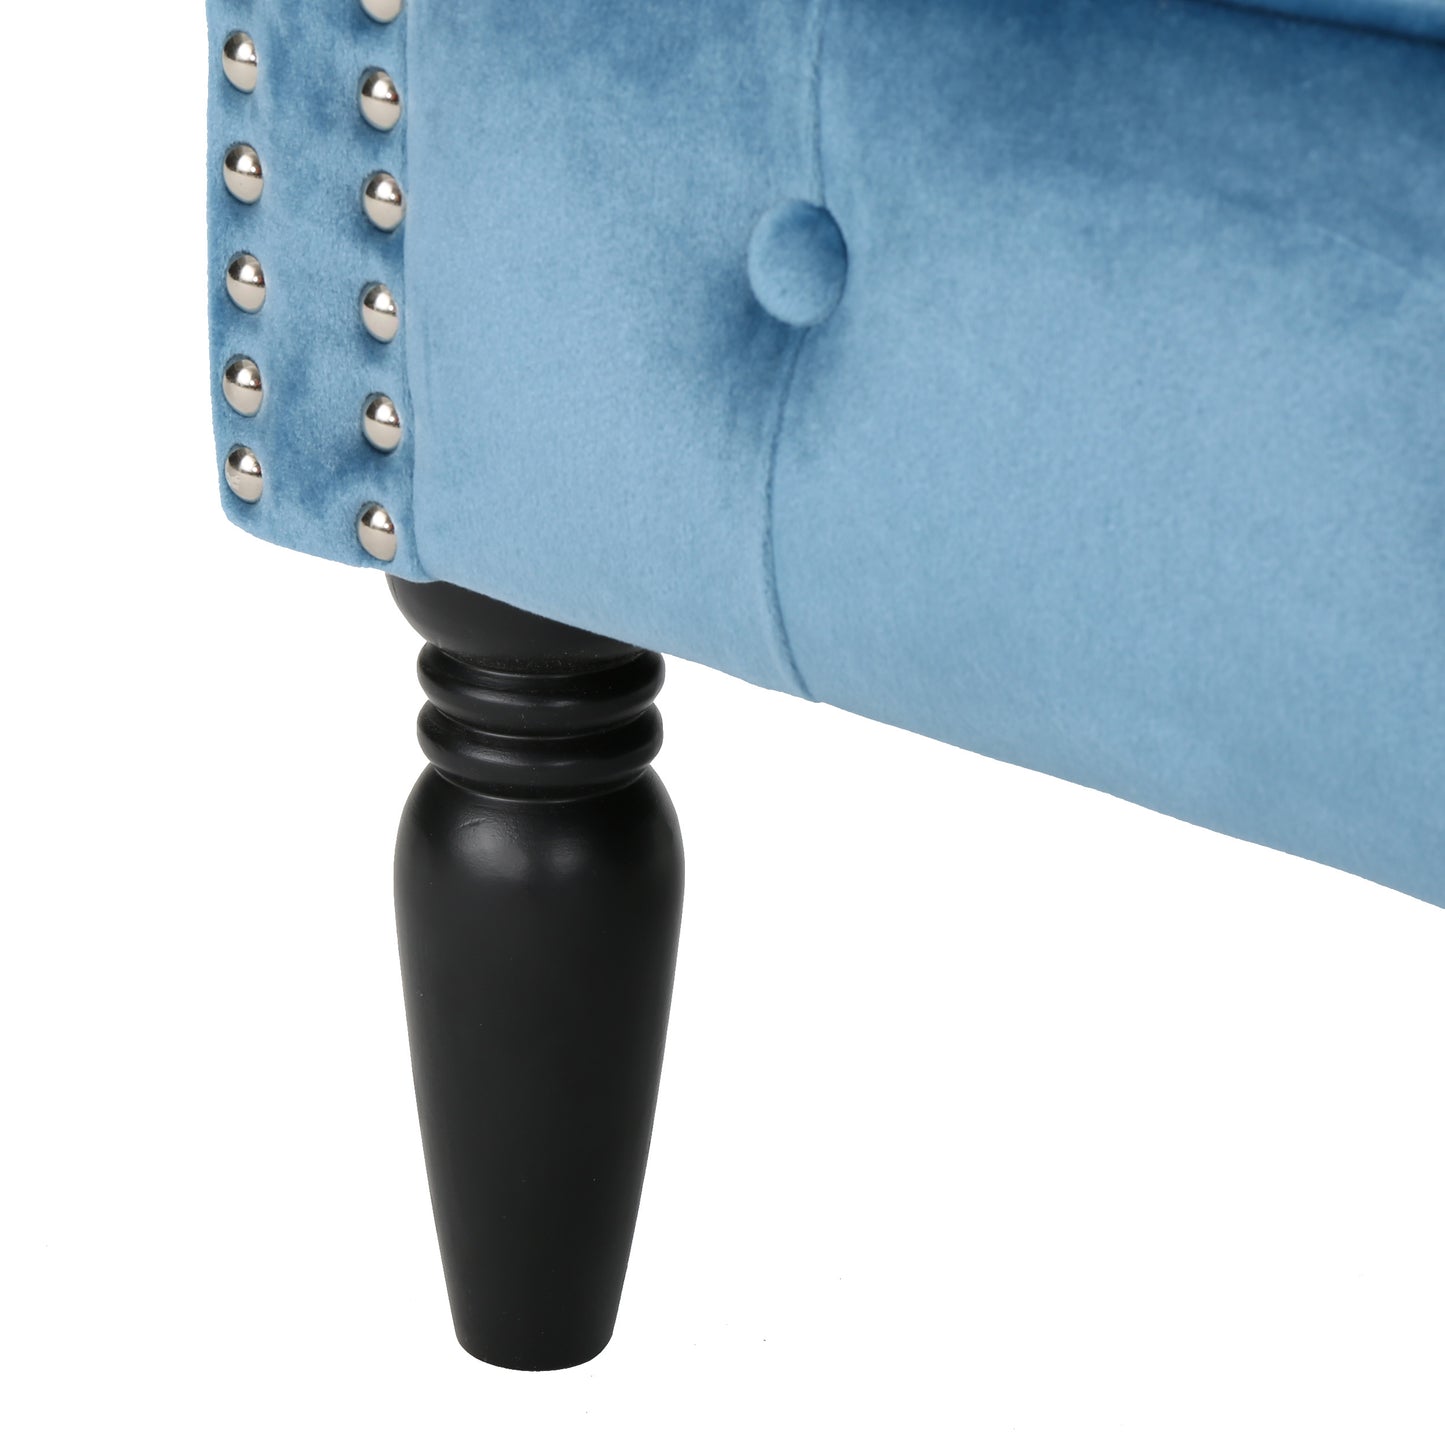 Aries Button-Tufted Velvet Rolled Back Tub Design Club Chair